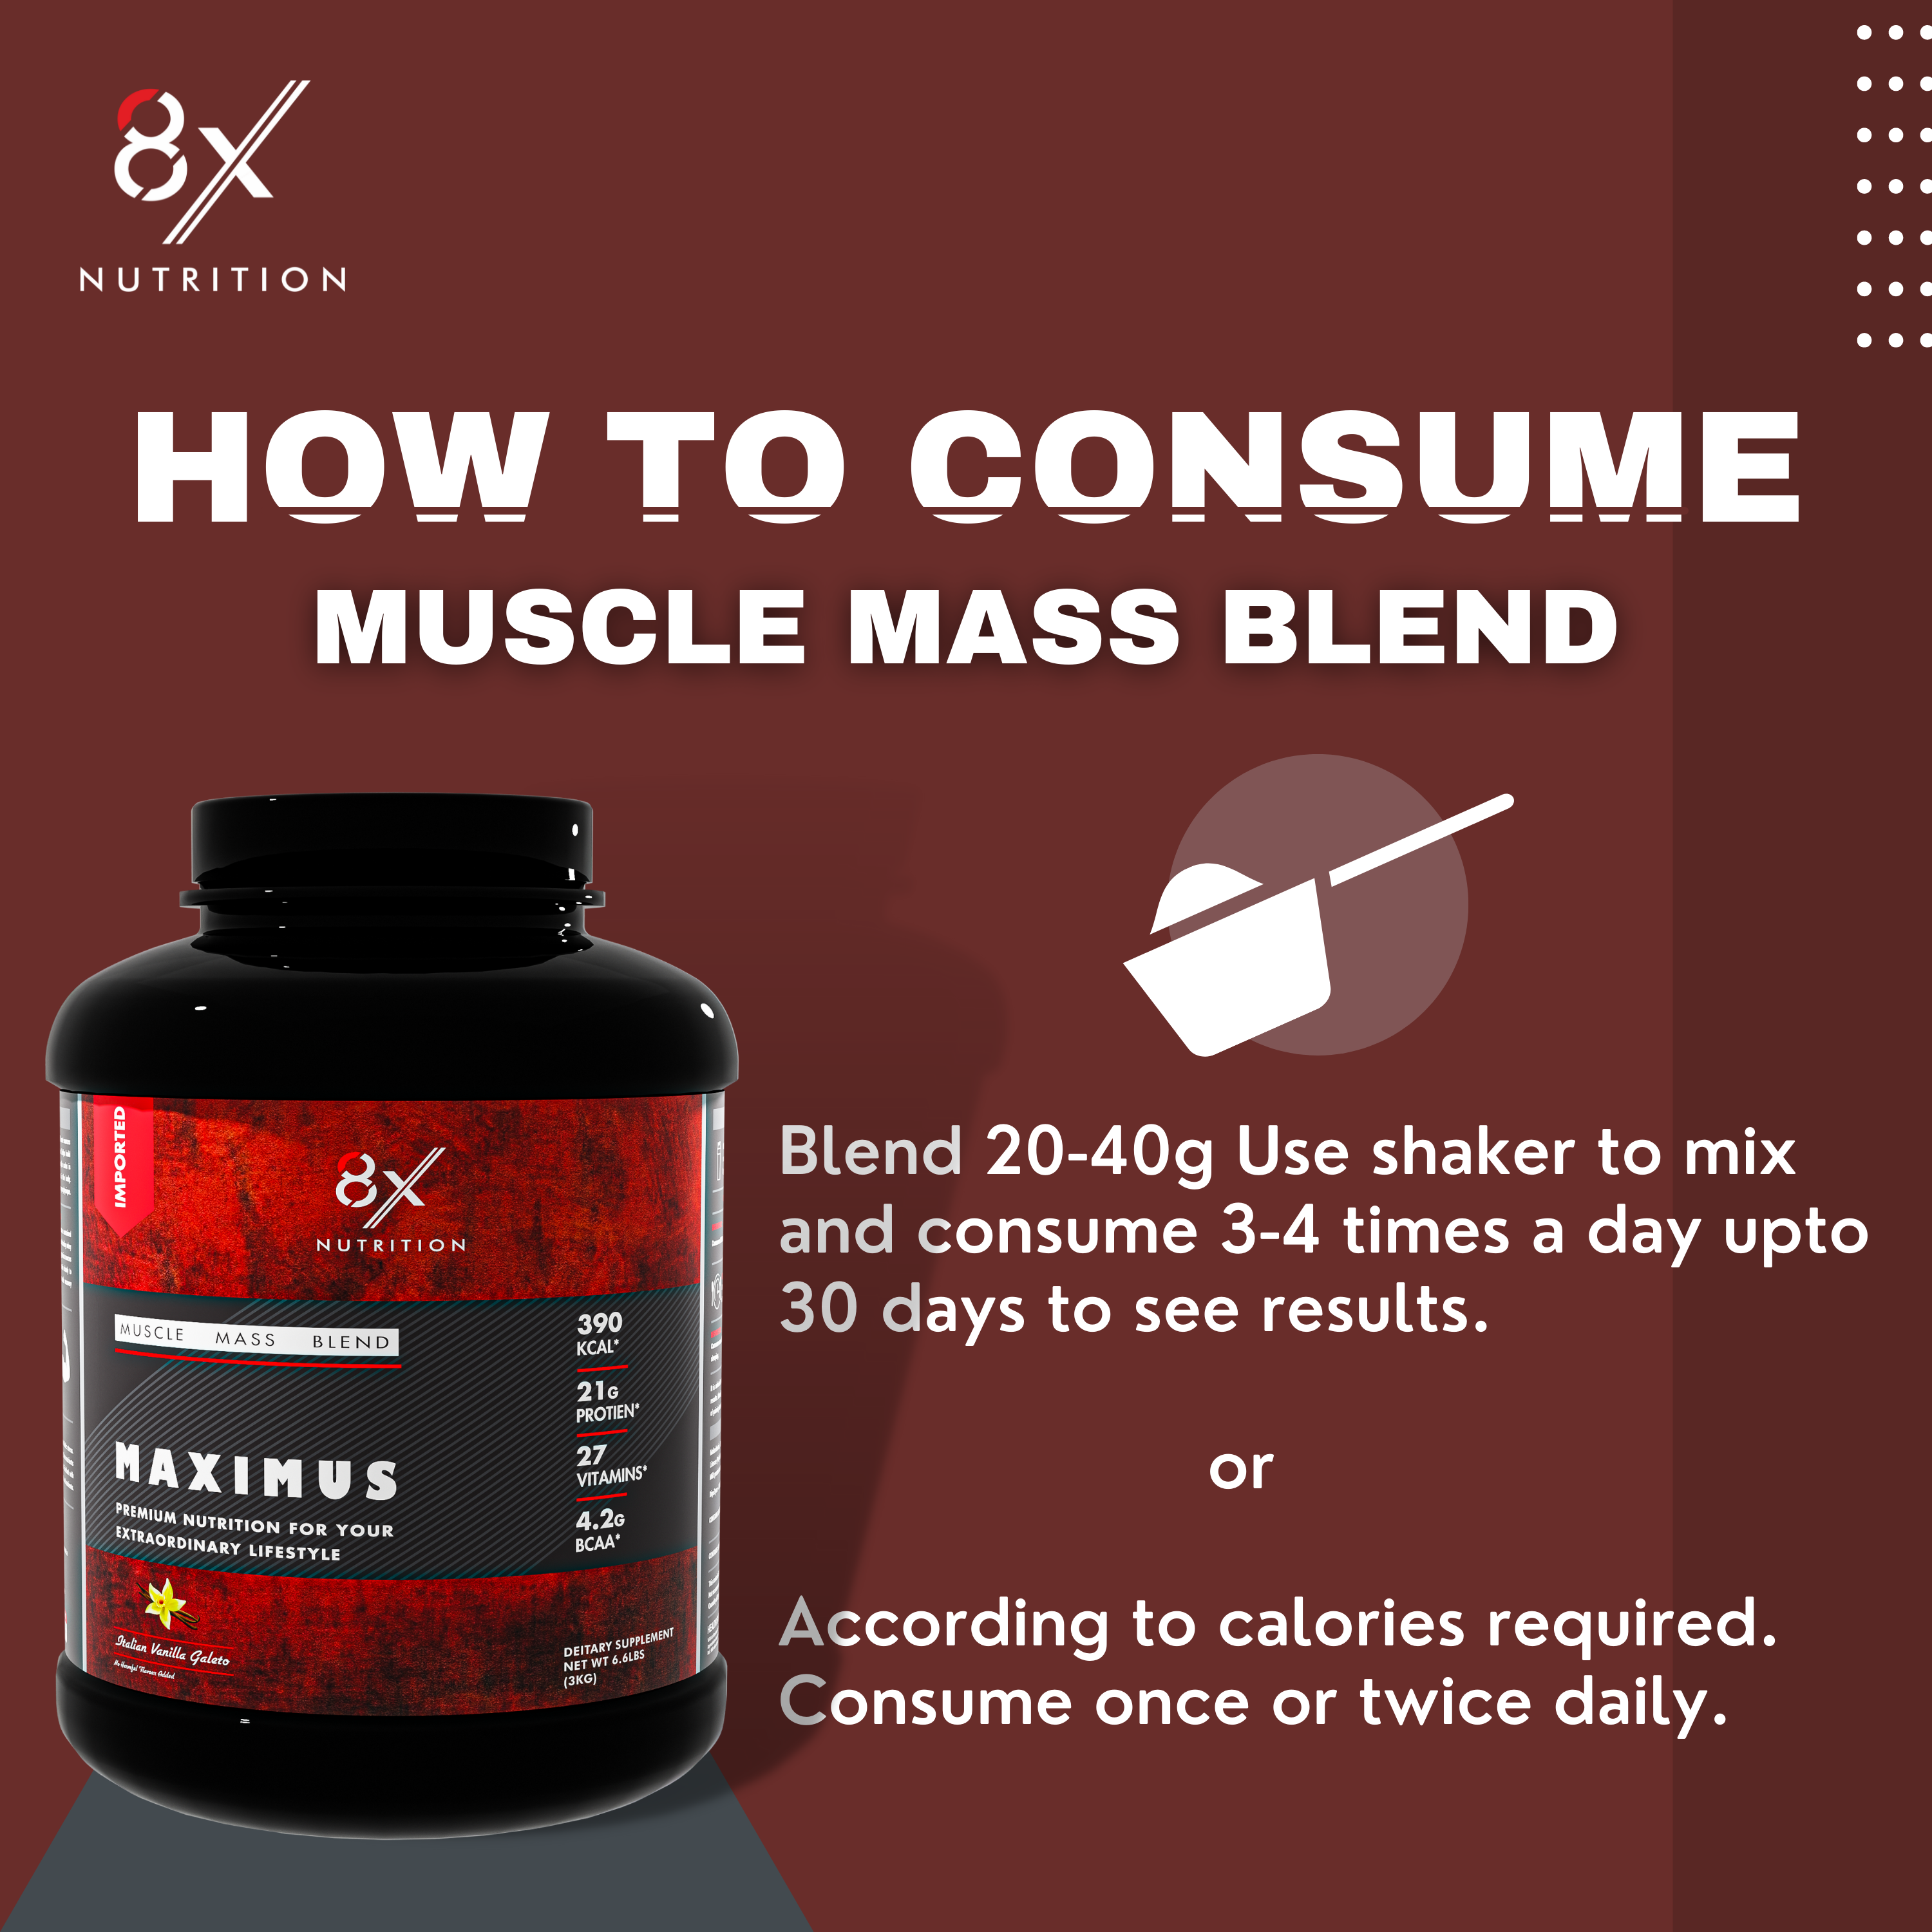 8X Nutrition Muscle Mass Blend with Complex Carbs and Proteins in 3:1 ratio (6.6 LBS) - ITALIN VANILLA GELATO